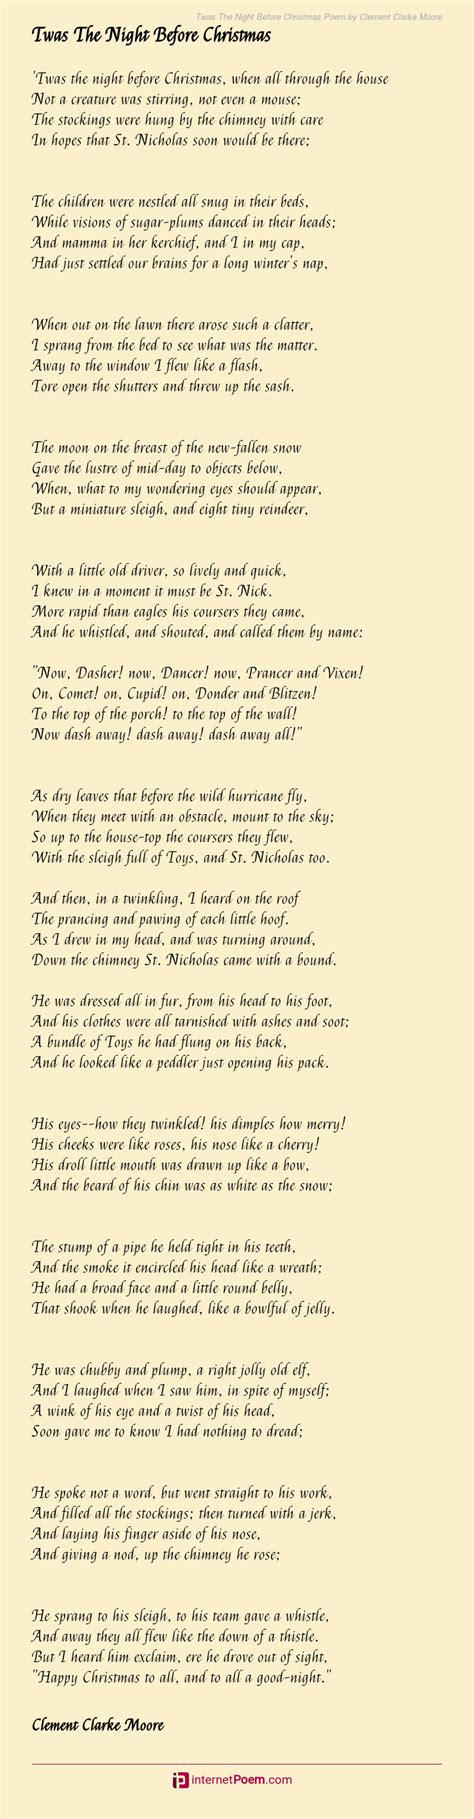 Twas The Night Before Christmas Poem By Clement Clarke Moore 65520